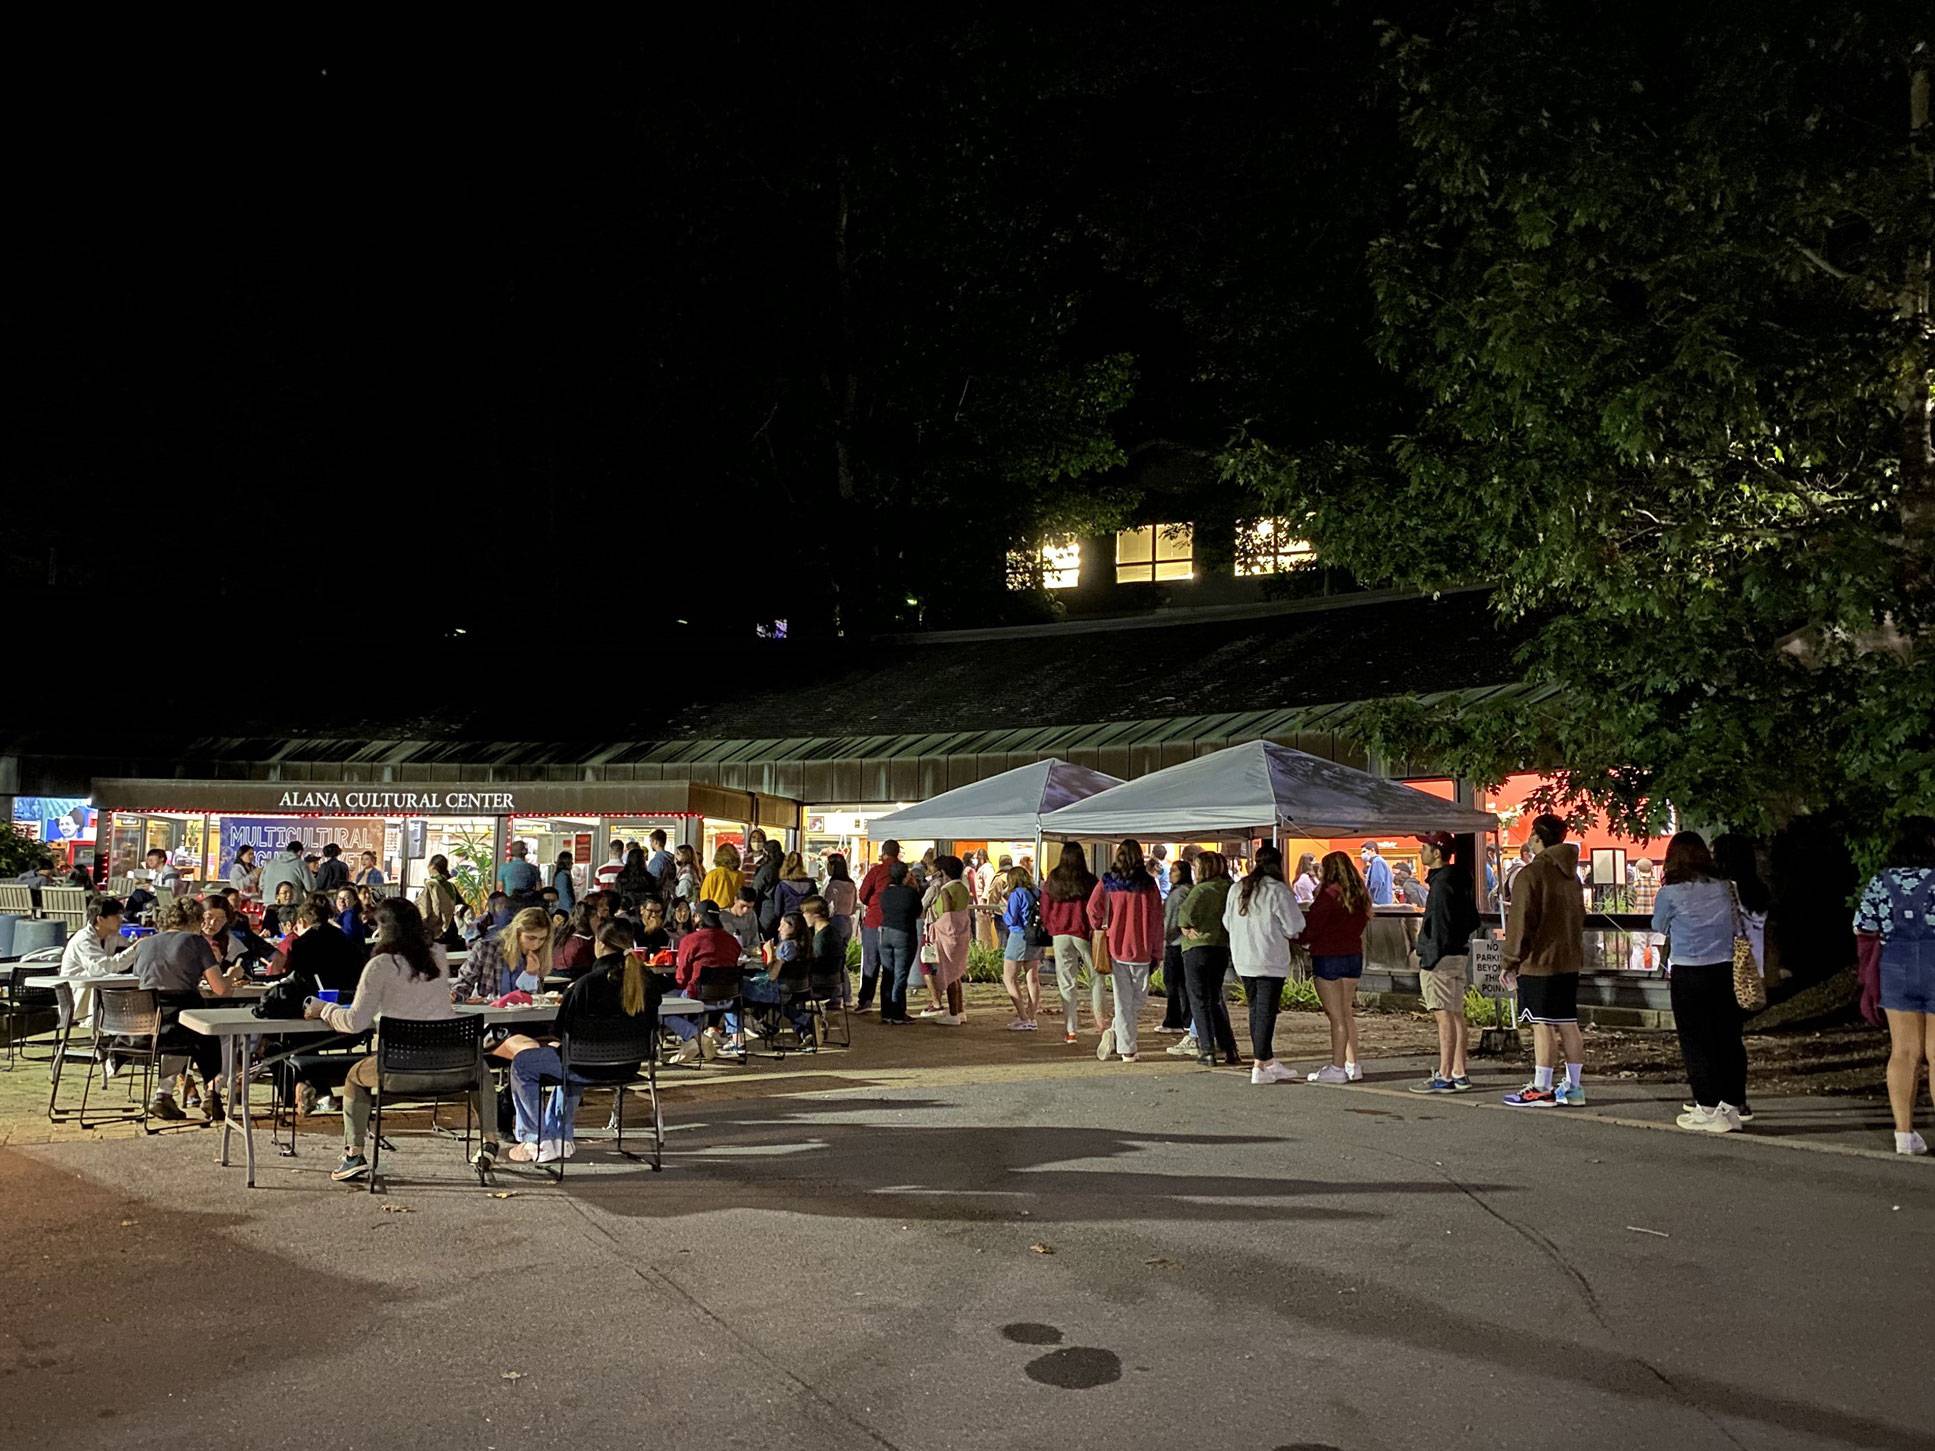 Students seated at tables and standing in line outside the ALANA Cultural Center at night time